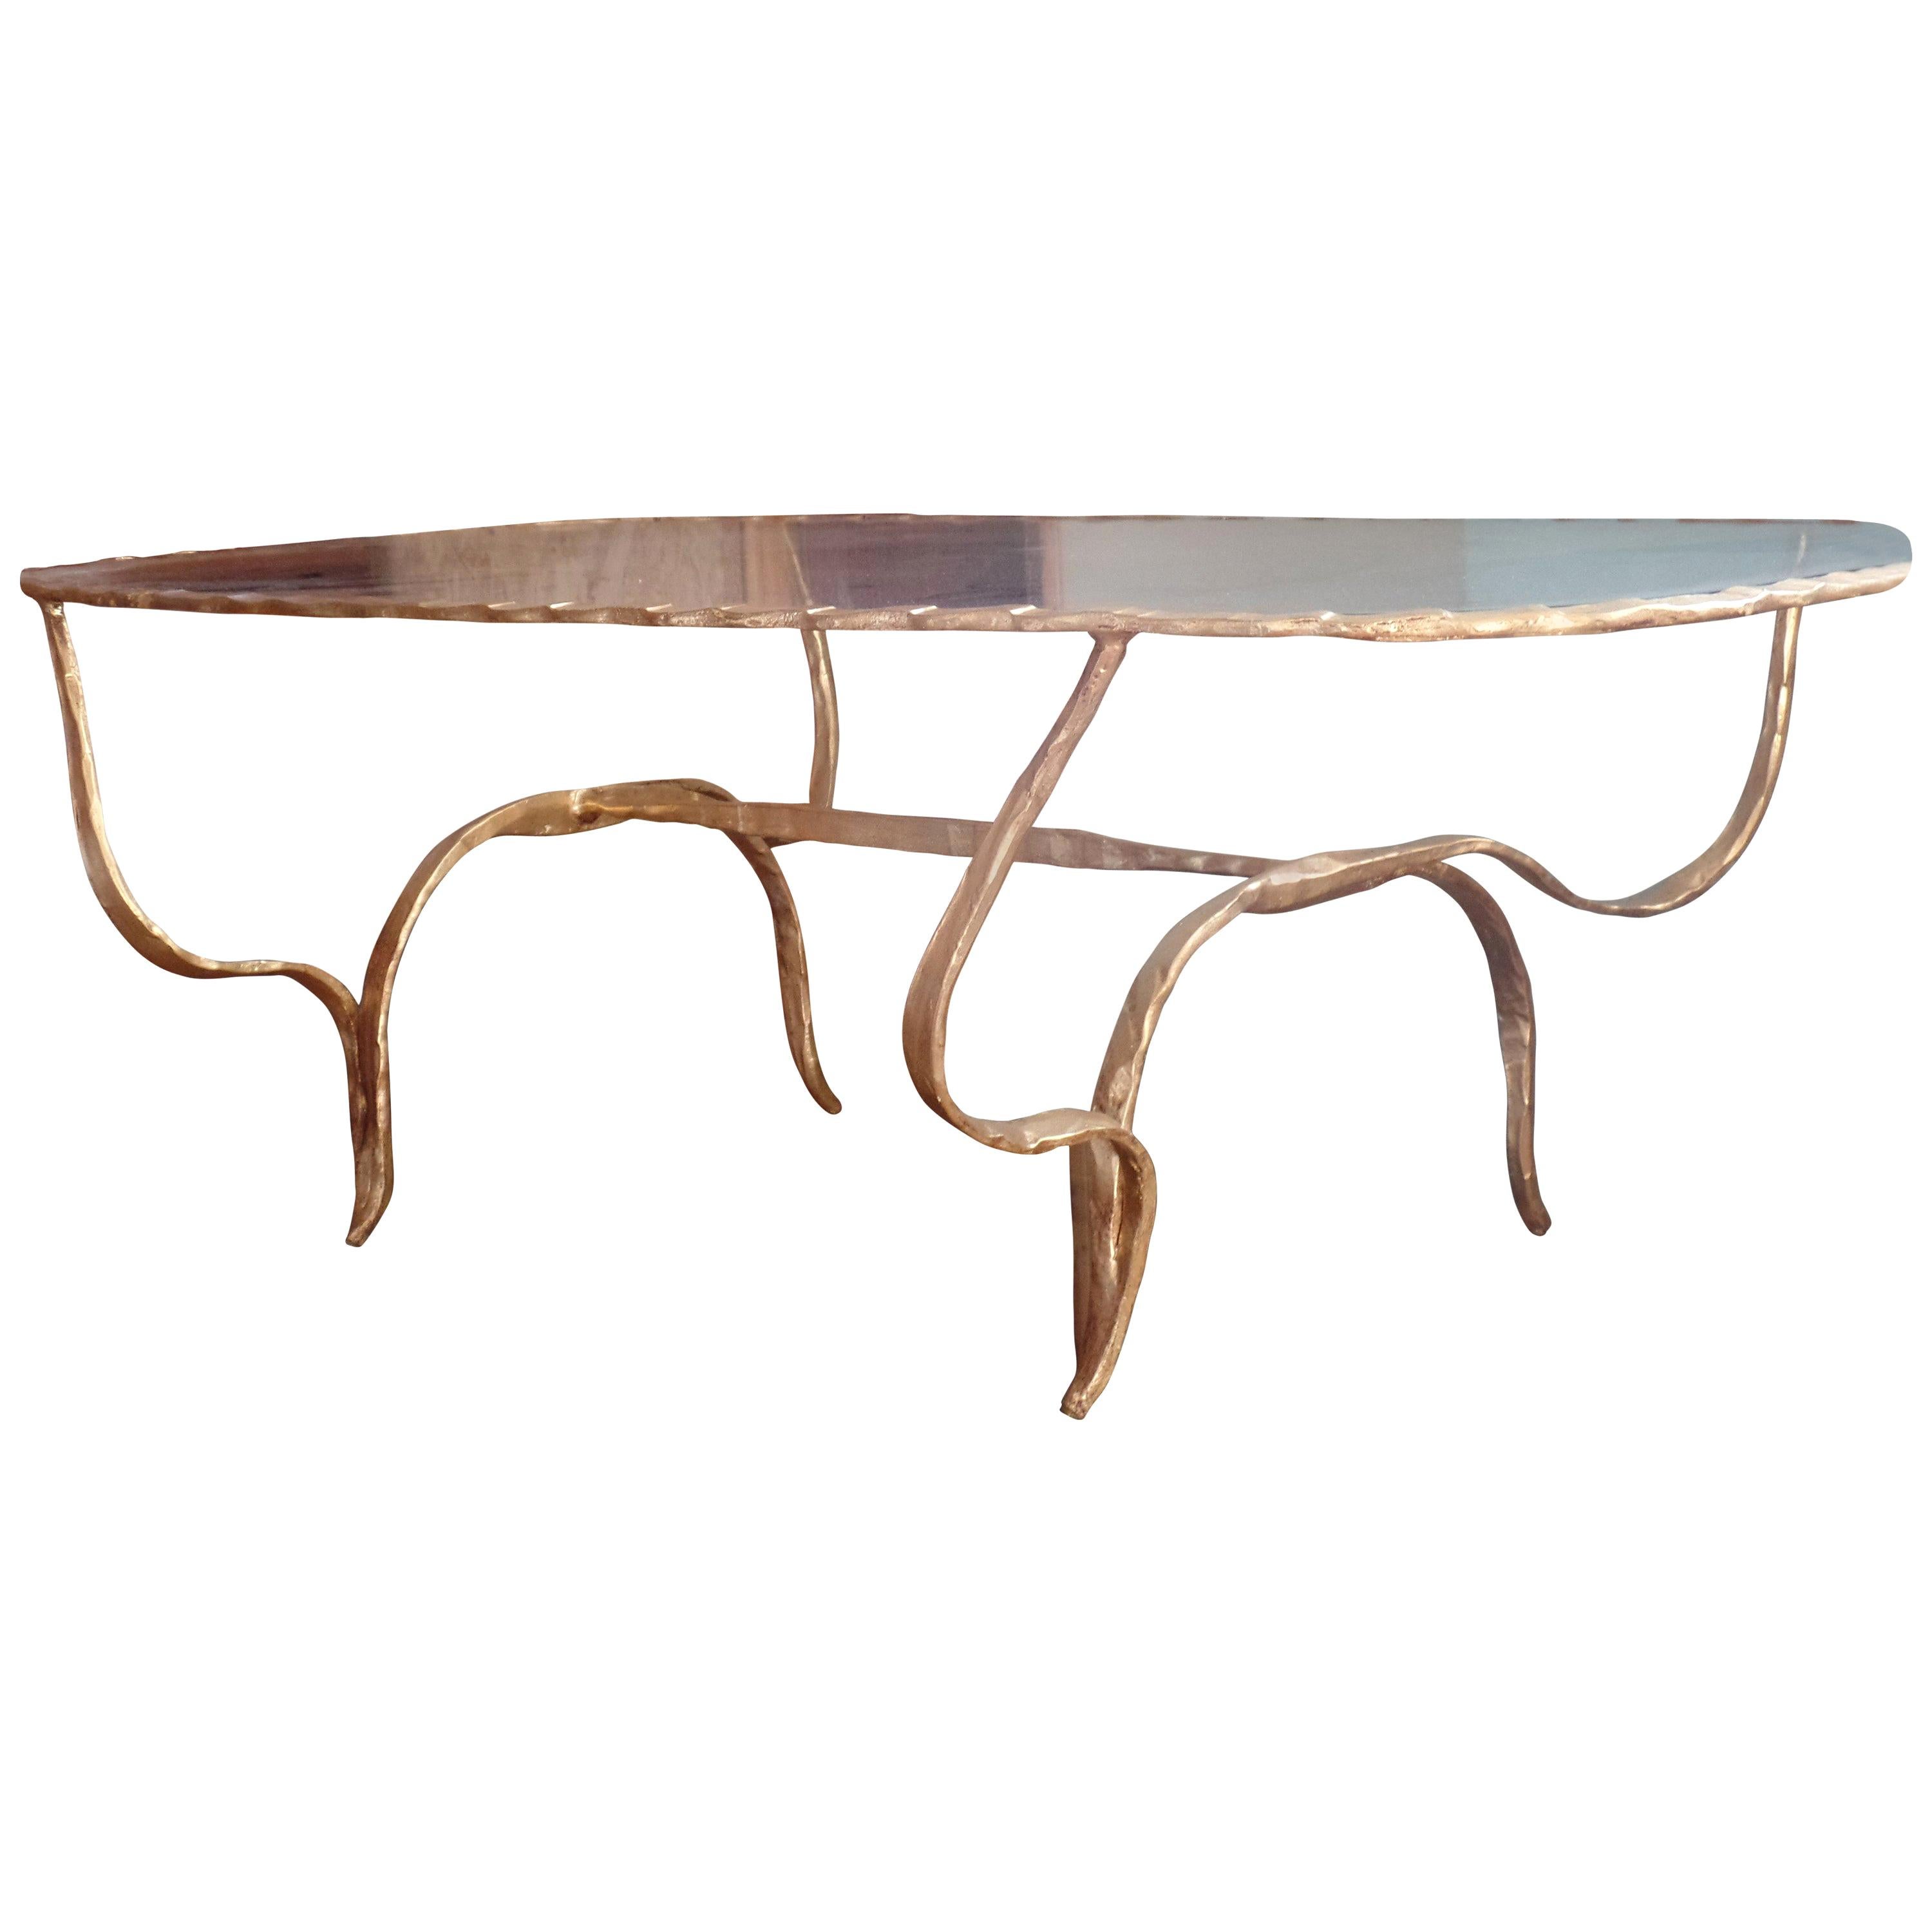 Unique Italian Gilt and Forged Iron Coffee Table by Sculptor, Giovanni Banci